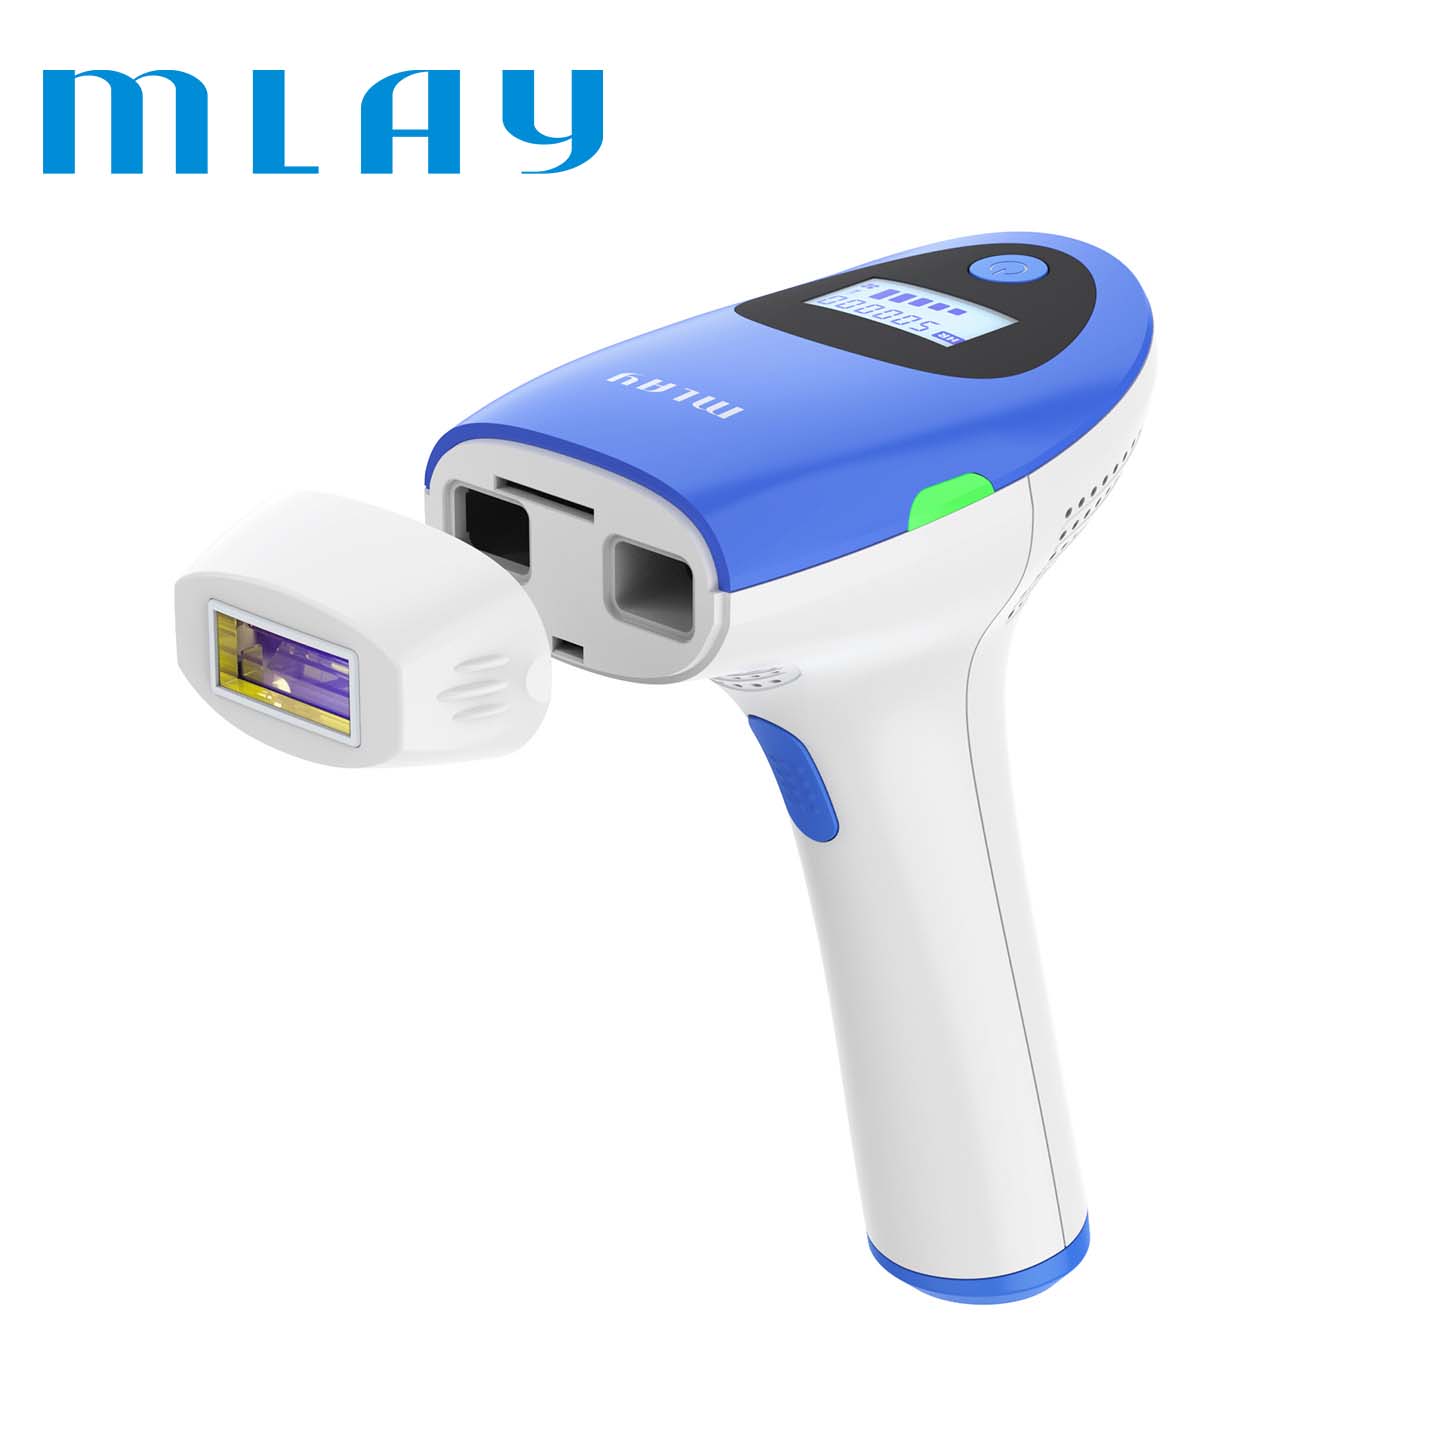 OEM hand held full body painless & permanent home hair removal laser machine ipl device handset wholesale FCC